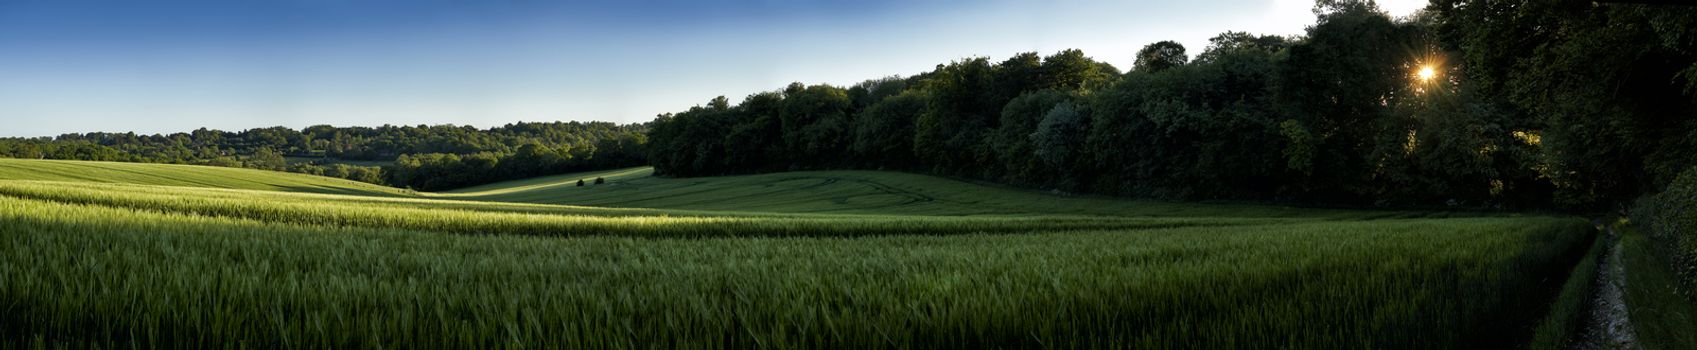 Panoramic view of green wheat growing in a field with sun setting through trees in The Chiltern Hills,England